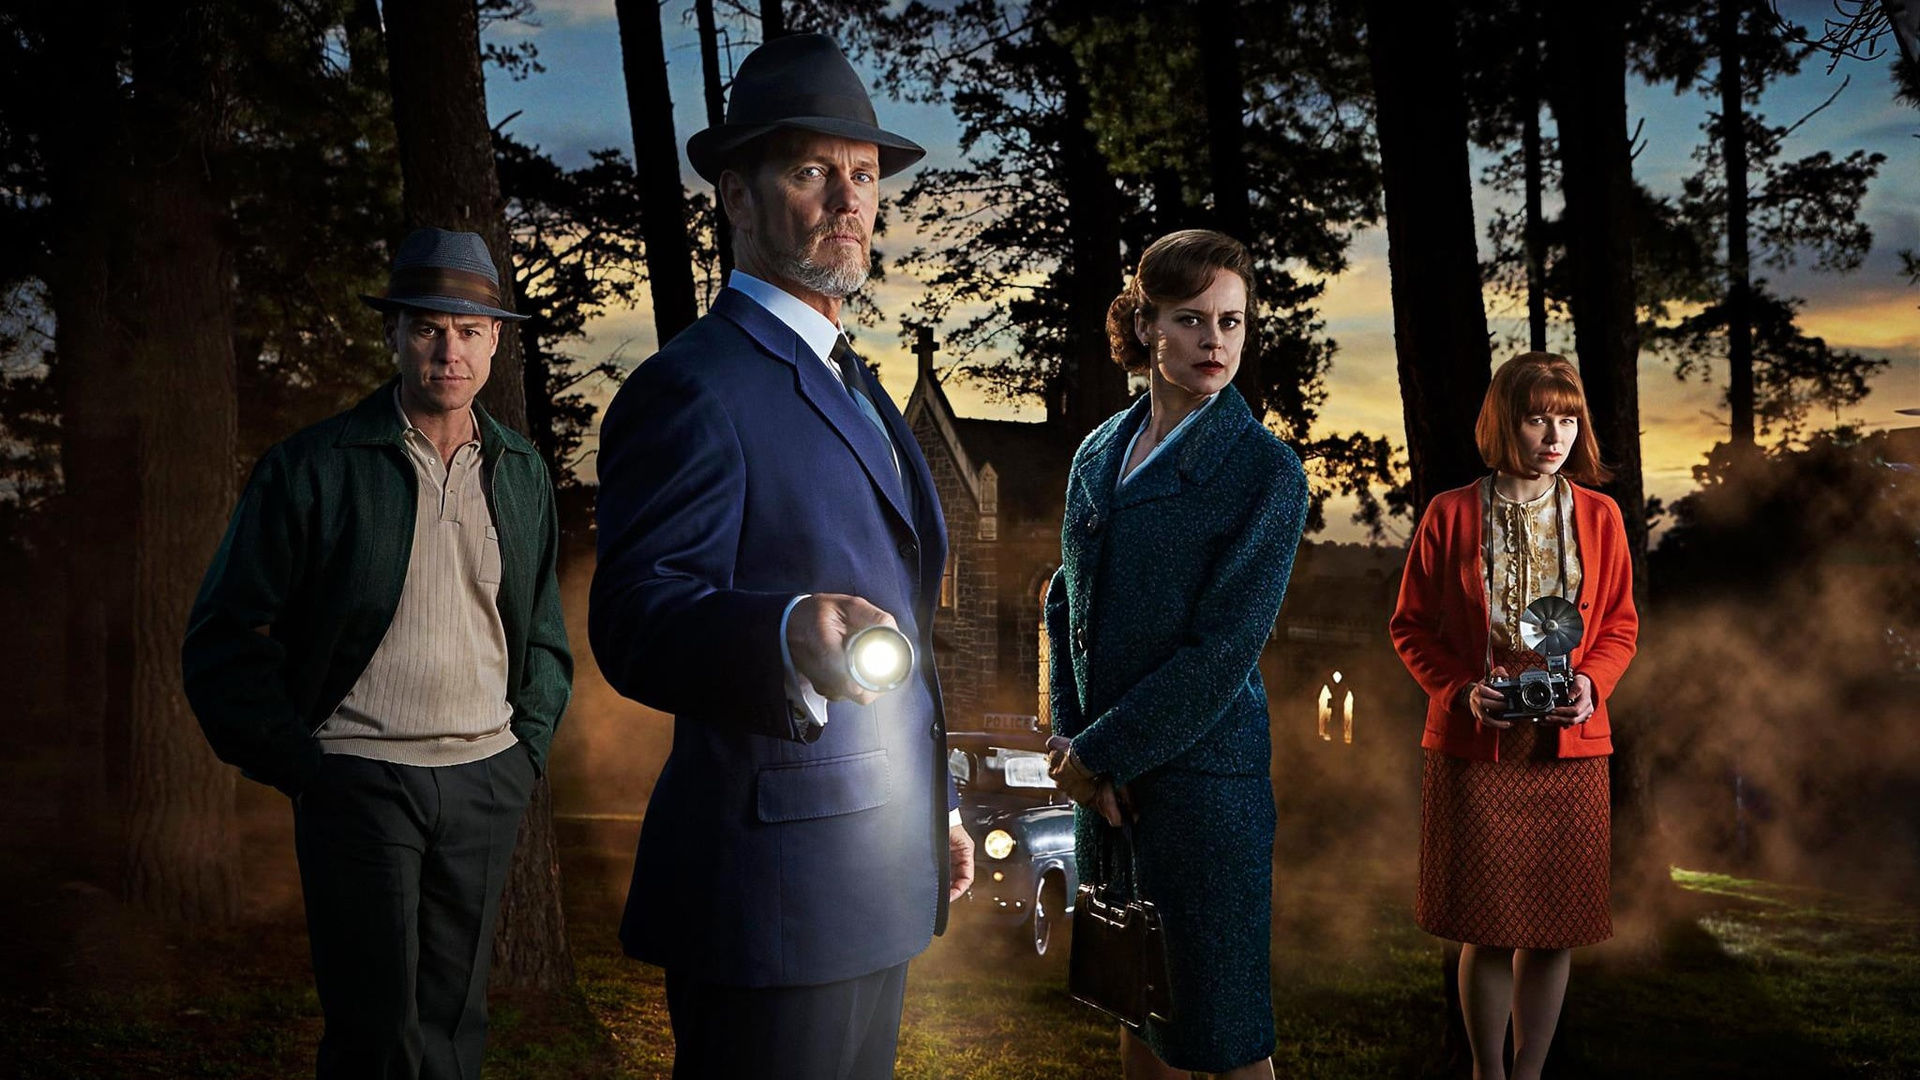 The Doctor Blake Mysteries Image #554277 TVmaze.